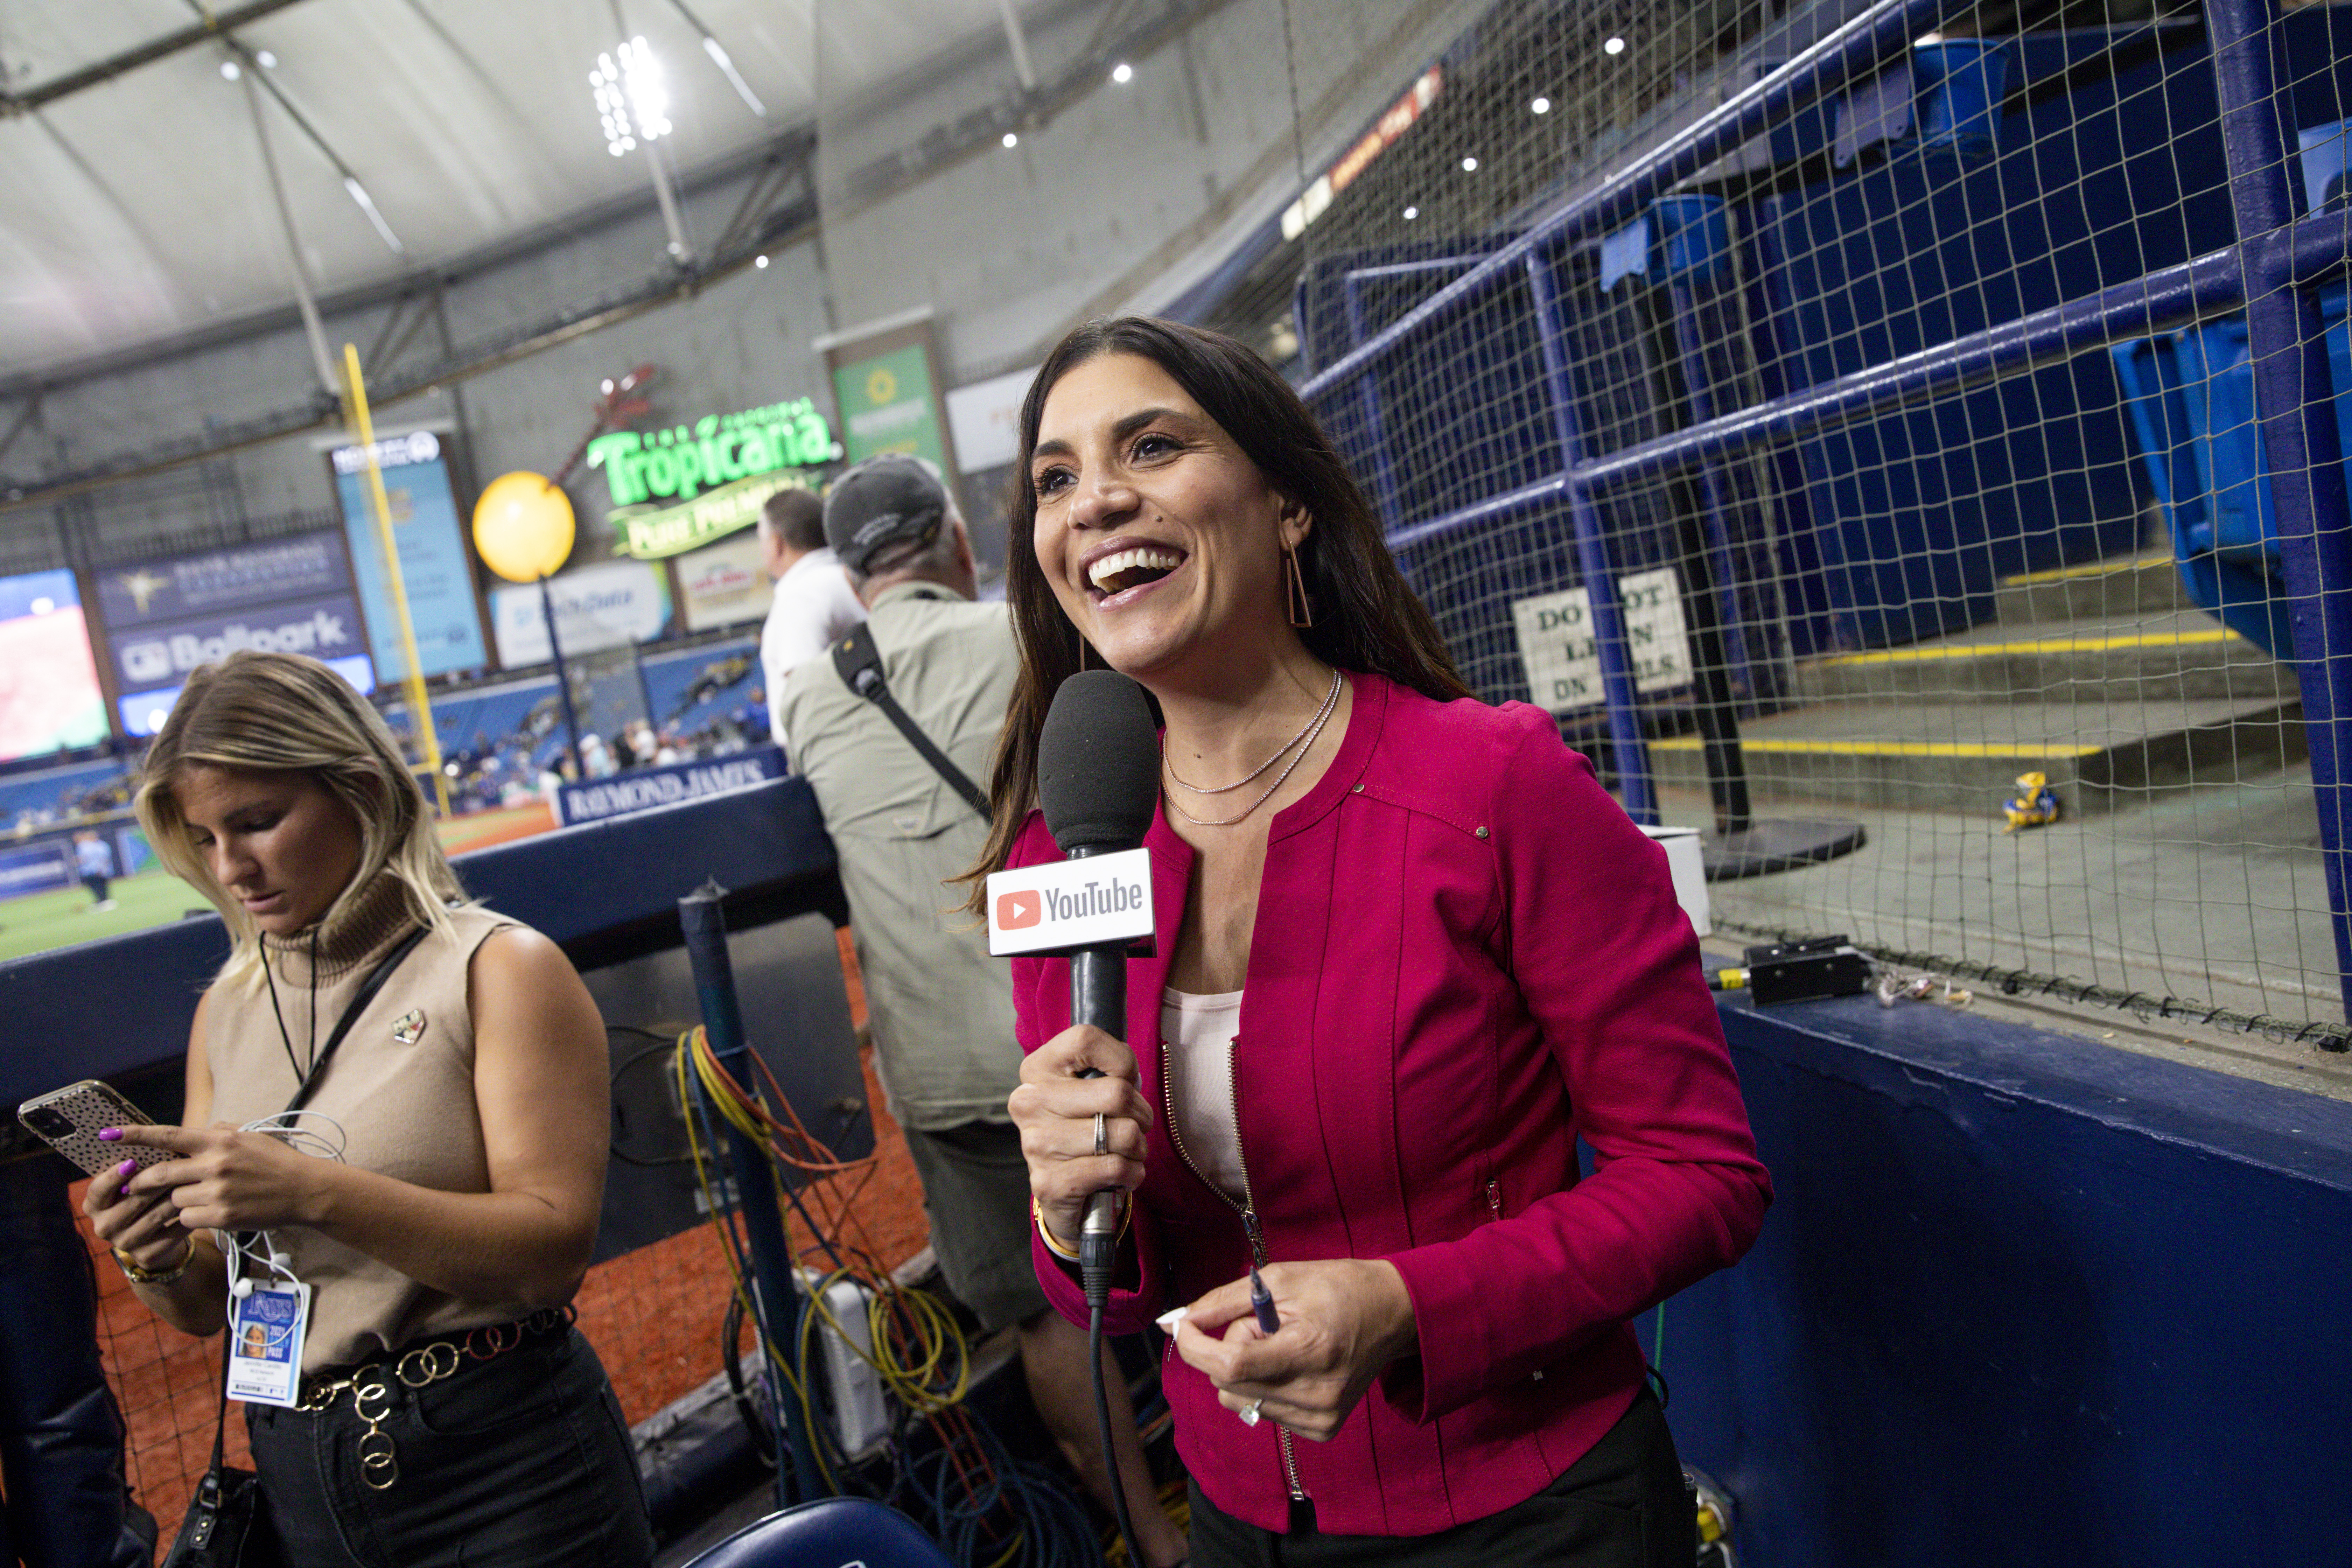 Her story: 1st time all-female broadcast crew calls MLB game